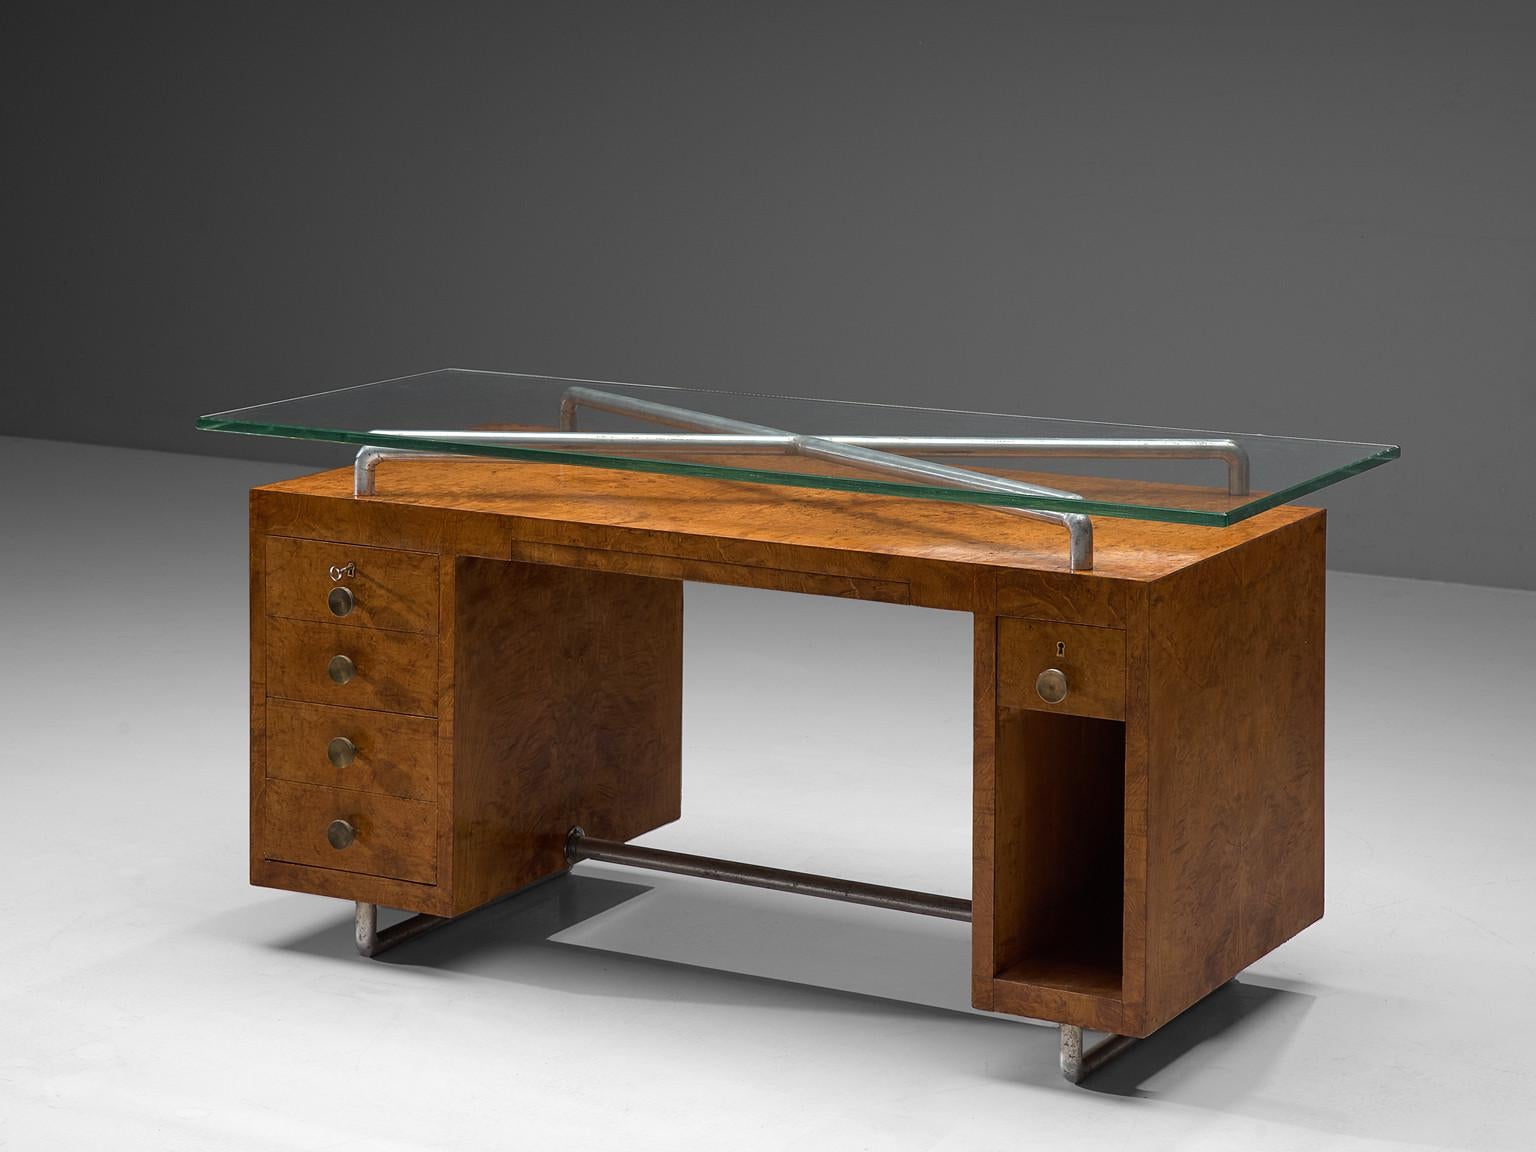 Pietro Lingeri, desk, briar root veneer, glass, brass, metal, Italy, 1930s

This rationalist desk is designed by the Italian architect Pietro Lingeri. The desk features several compartments and drawers with round brass handles. These conservative